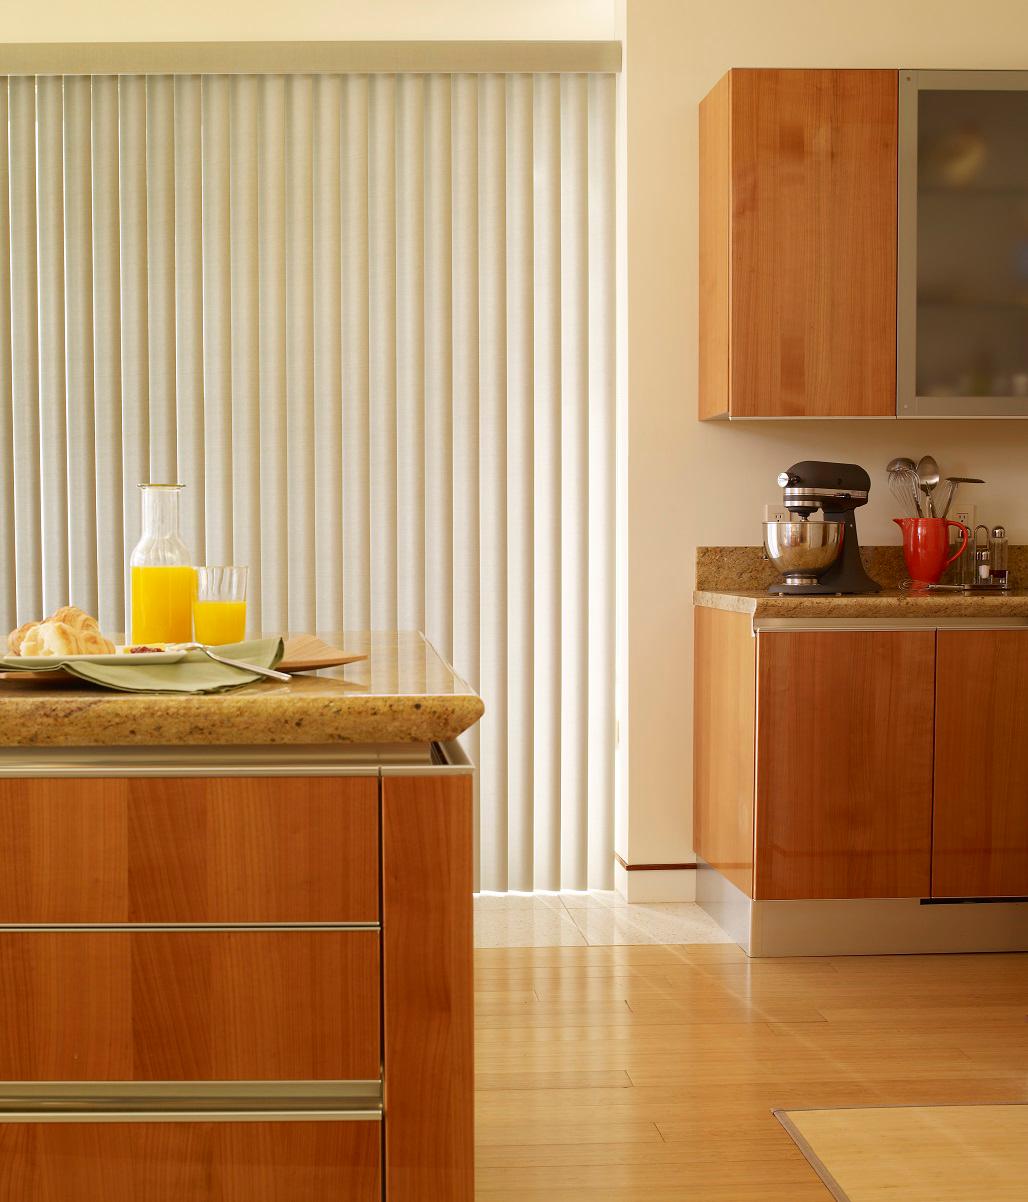 Ready to be enlightened? Then try our Enlightened Vertical Blinds! They're sleek,  easy to use, perfect for both windows and sliding doors-and they look amazing in this kitchen.  BudgetBlindsNassauBellmore   VerticalBlinds  FreeConsultation  WindowWednesday